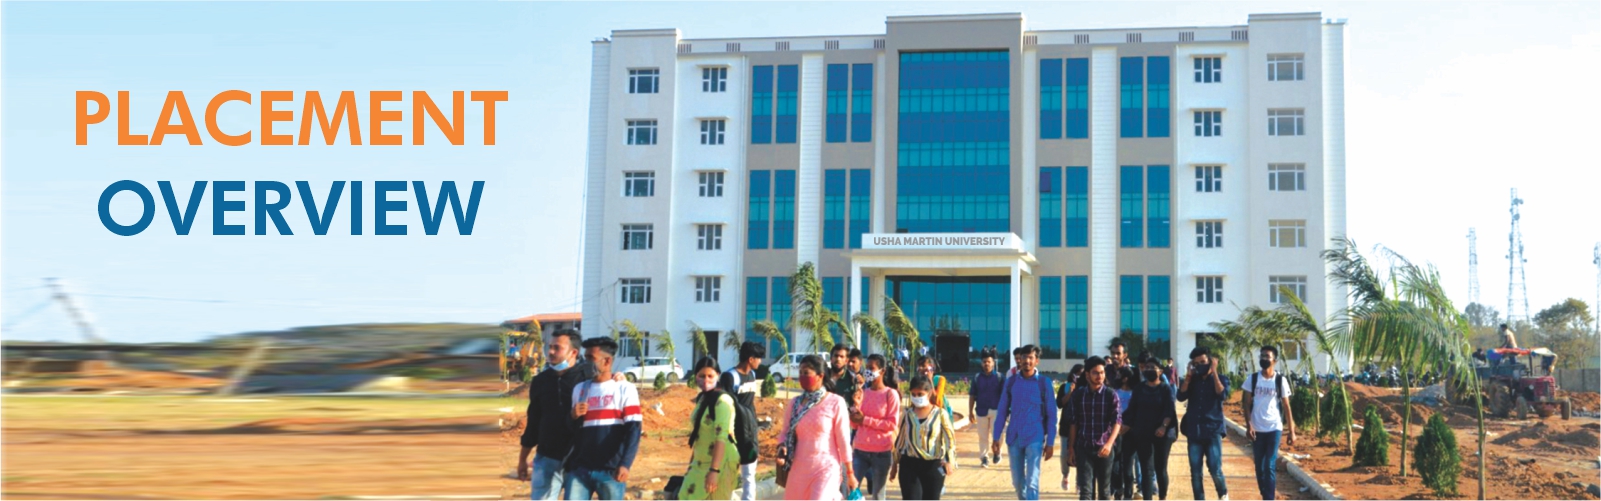 Placement Overview at Usha Martin University